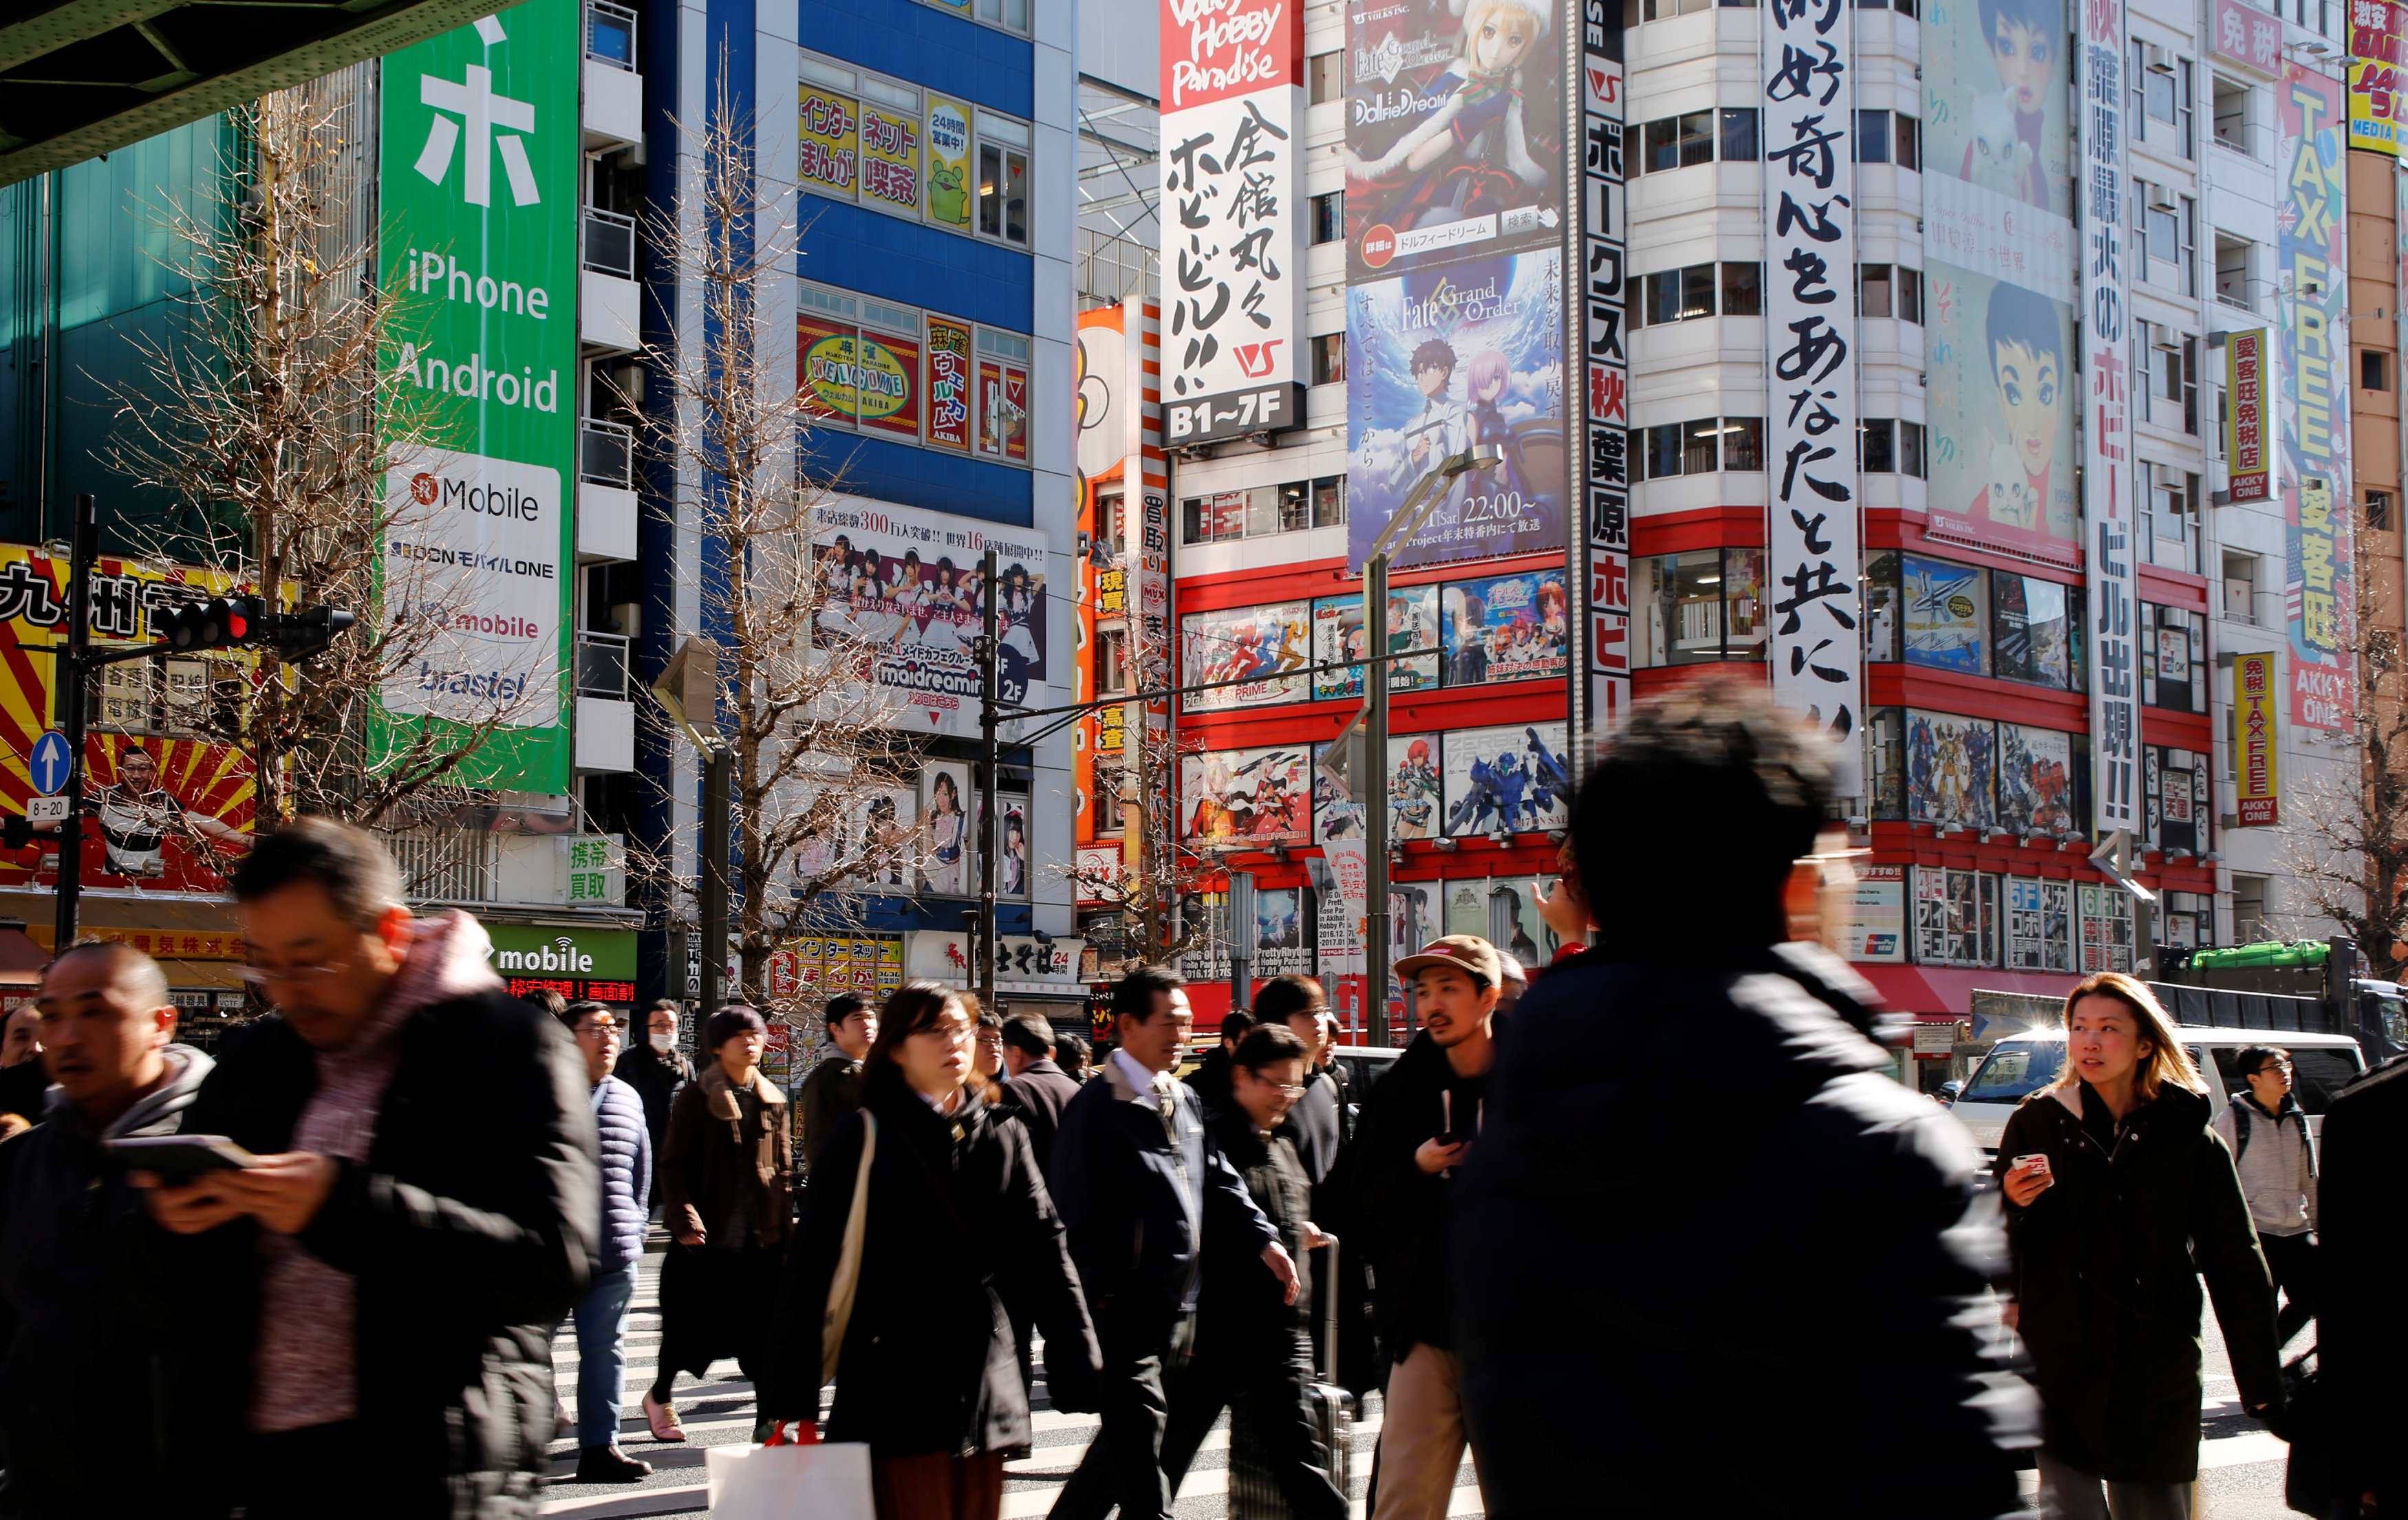 People cross a street in the Akihabara shopping district in Tokyo on Tuesday. The 22 percent increase in the number of international visitors to Japan from the year before is smaller than the 48 percent surge logged in 2015. | REUTERS